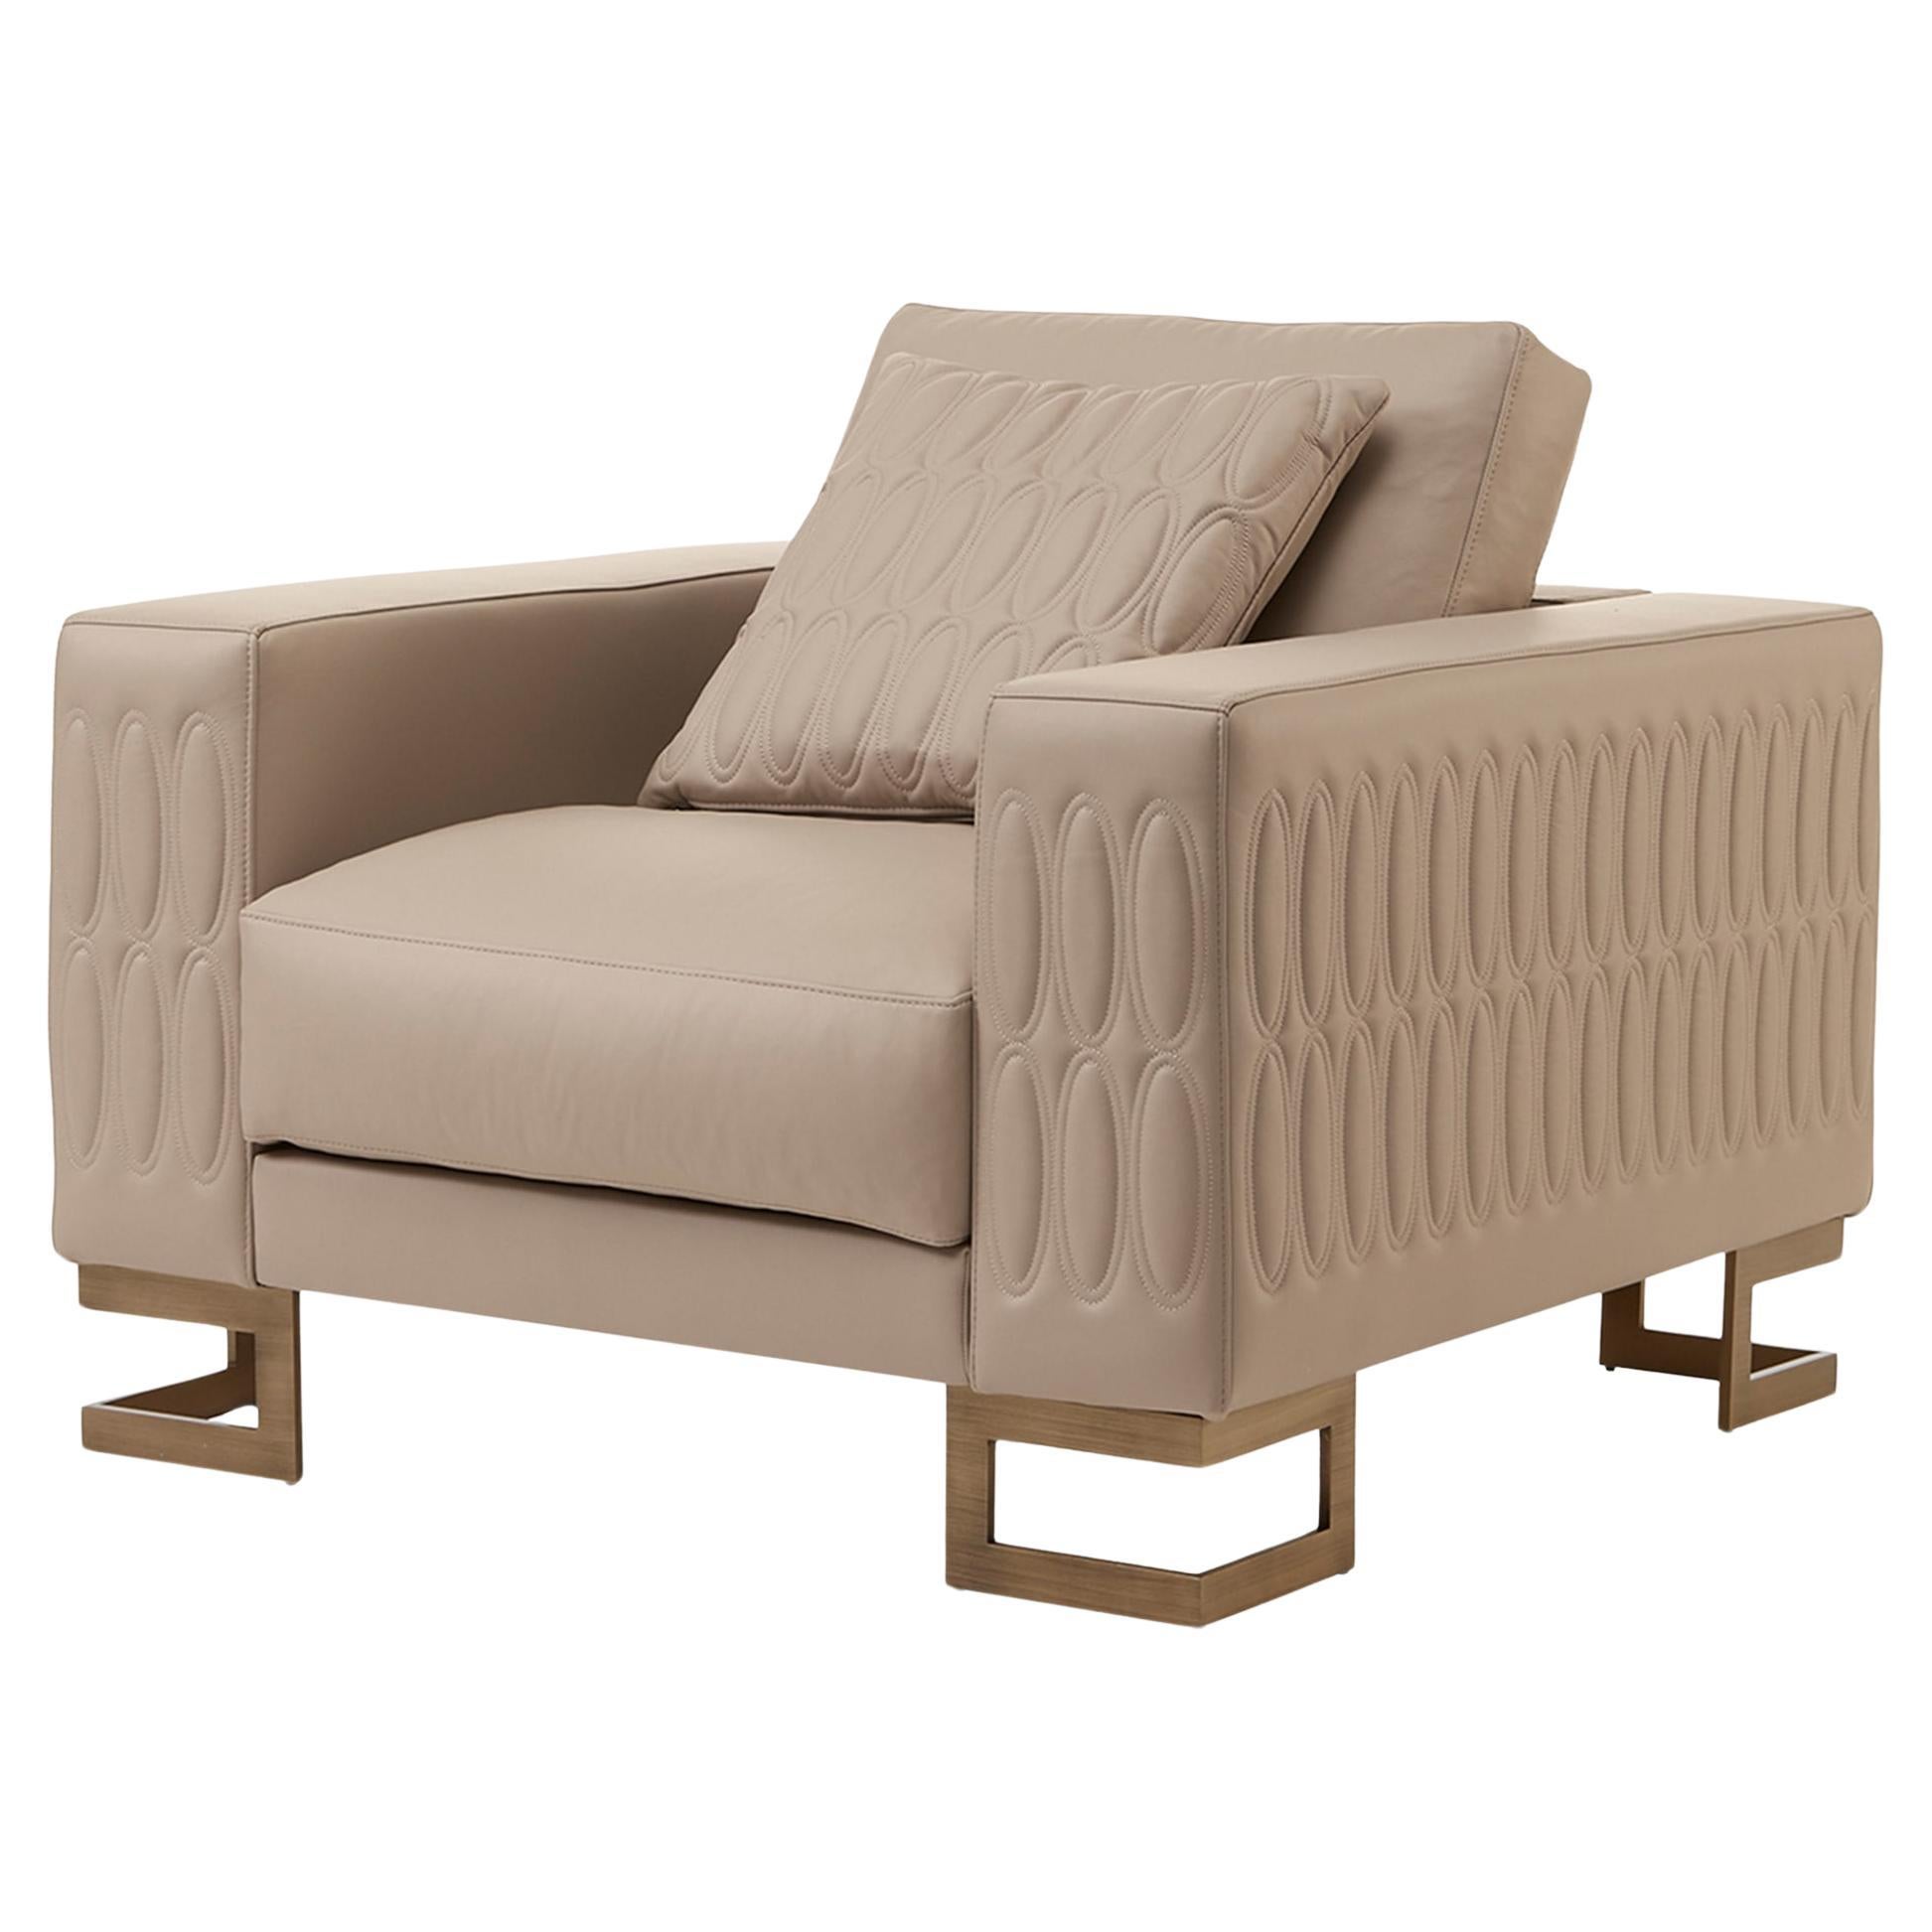 Zaffiro Square-Based Beige Armchair For Sale